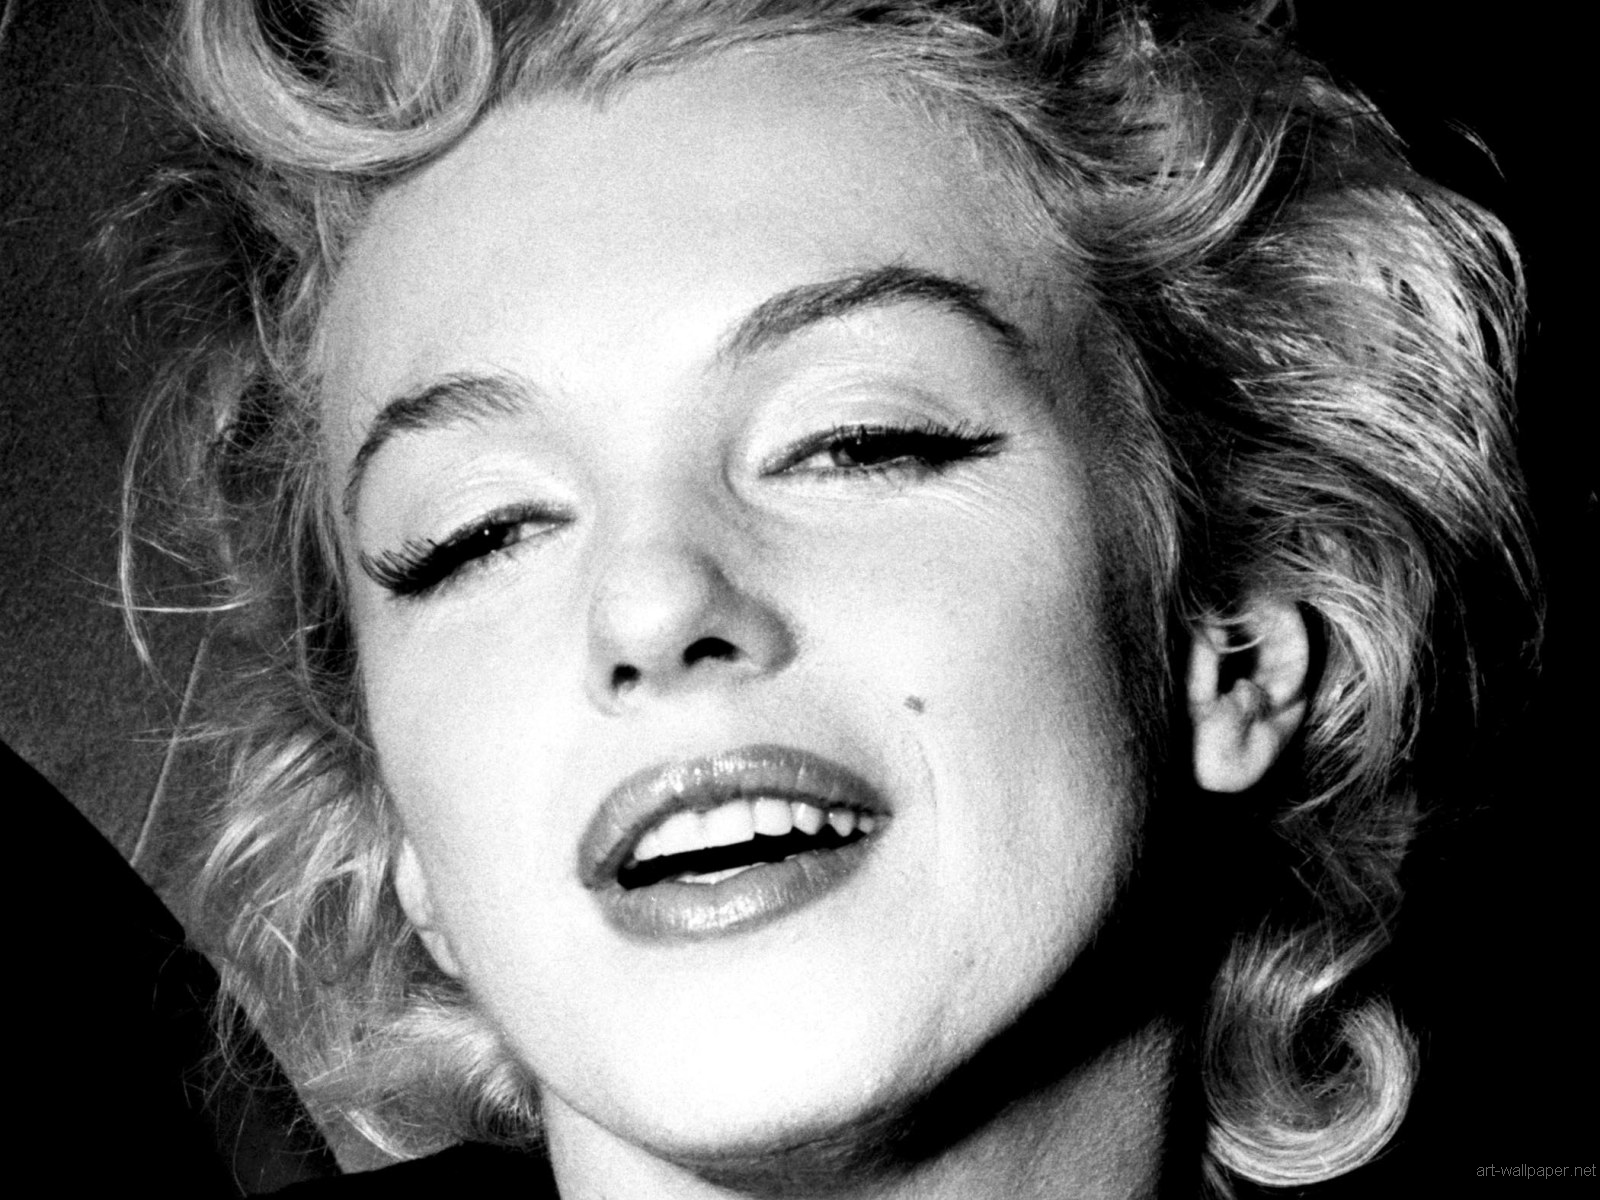 Marilyn Monroe Awesome And Fabulous Image HD Wallpaper Photos